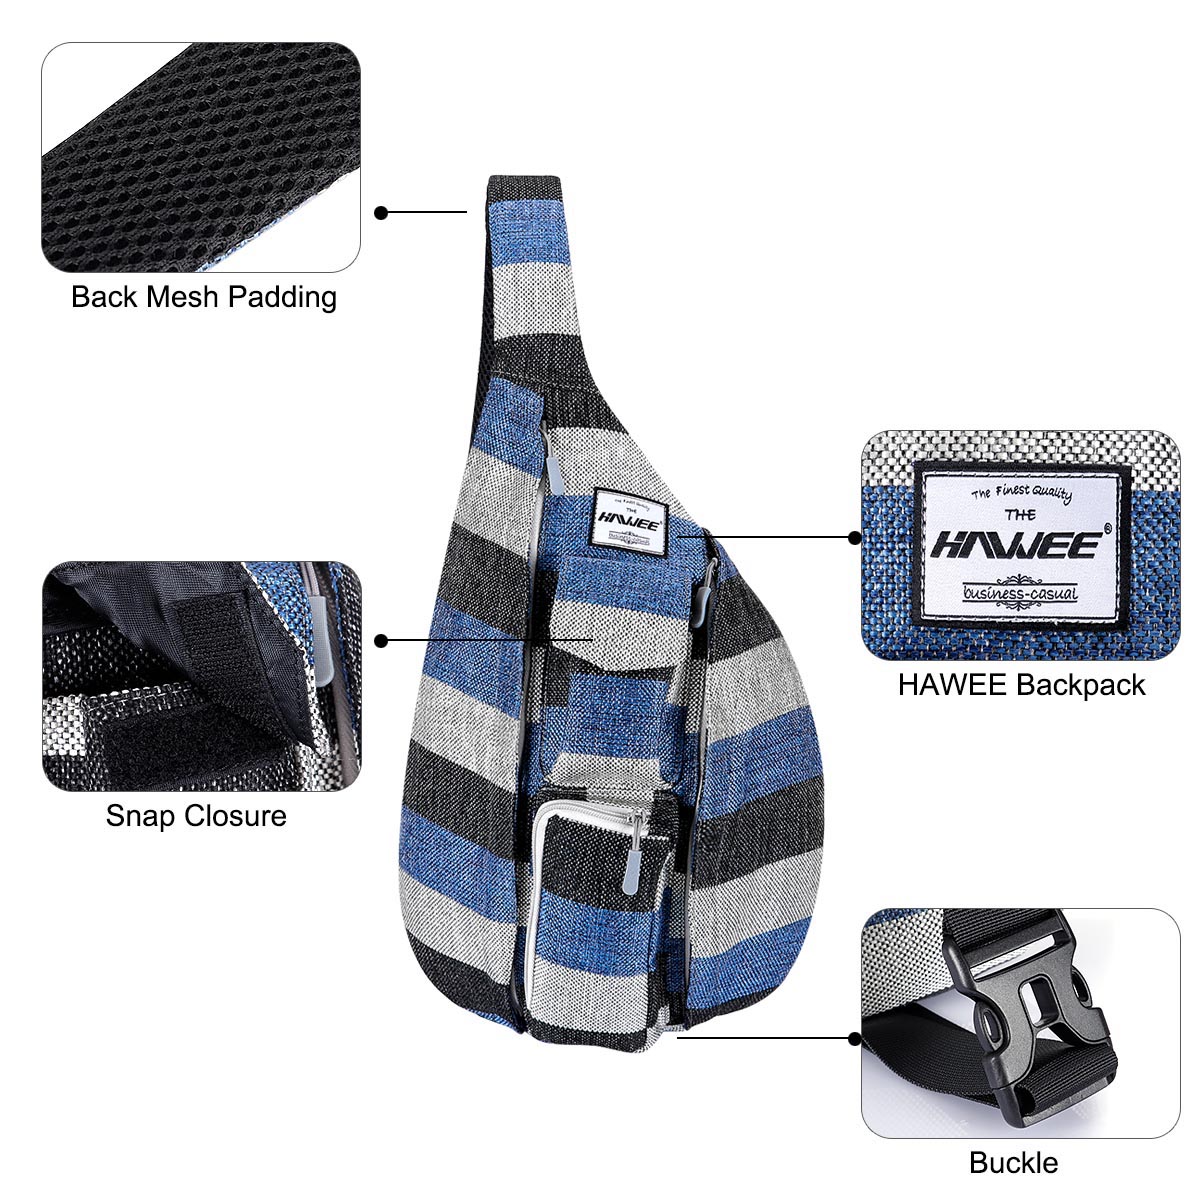 HAWEE Backpack for Women Hiking Backpack Chest Sling Bag Sports Travel Crossbody Daypack, Wide Stripes of Black/ Blue/Gray - image 4 of 7